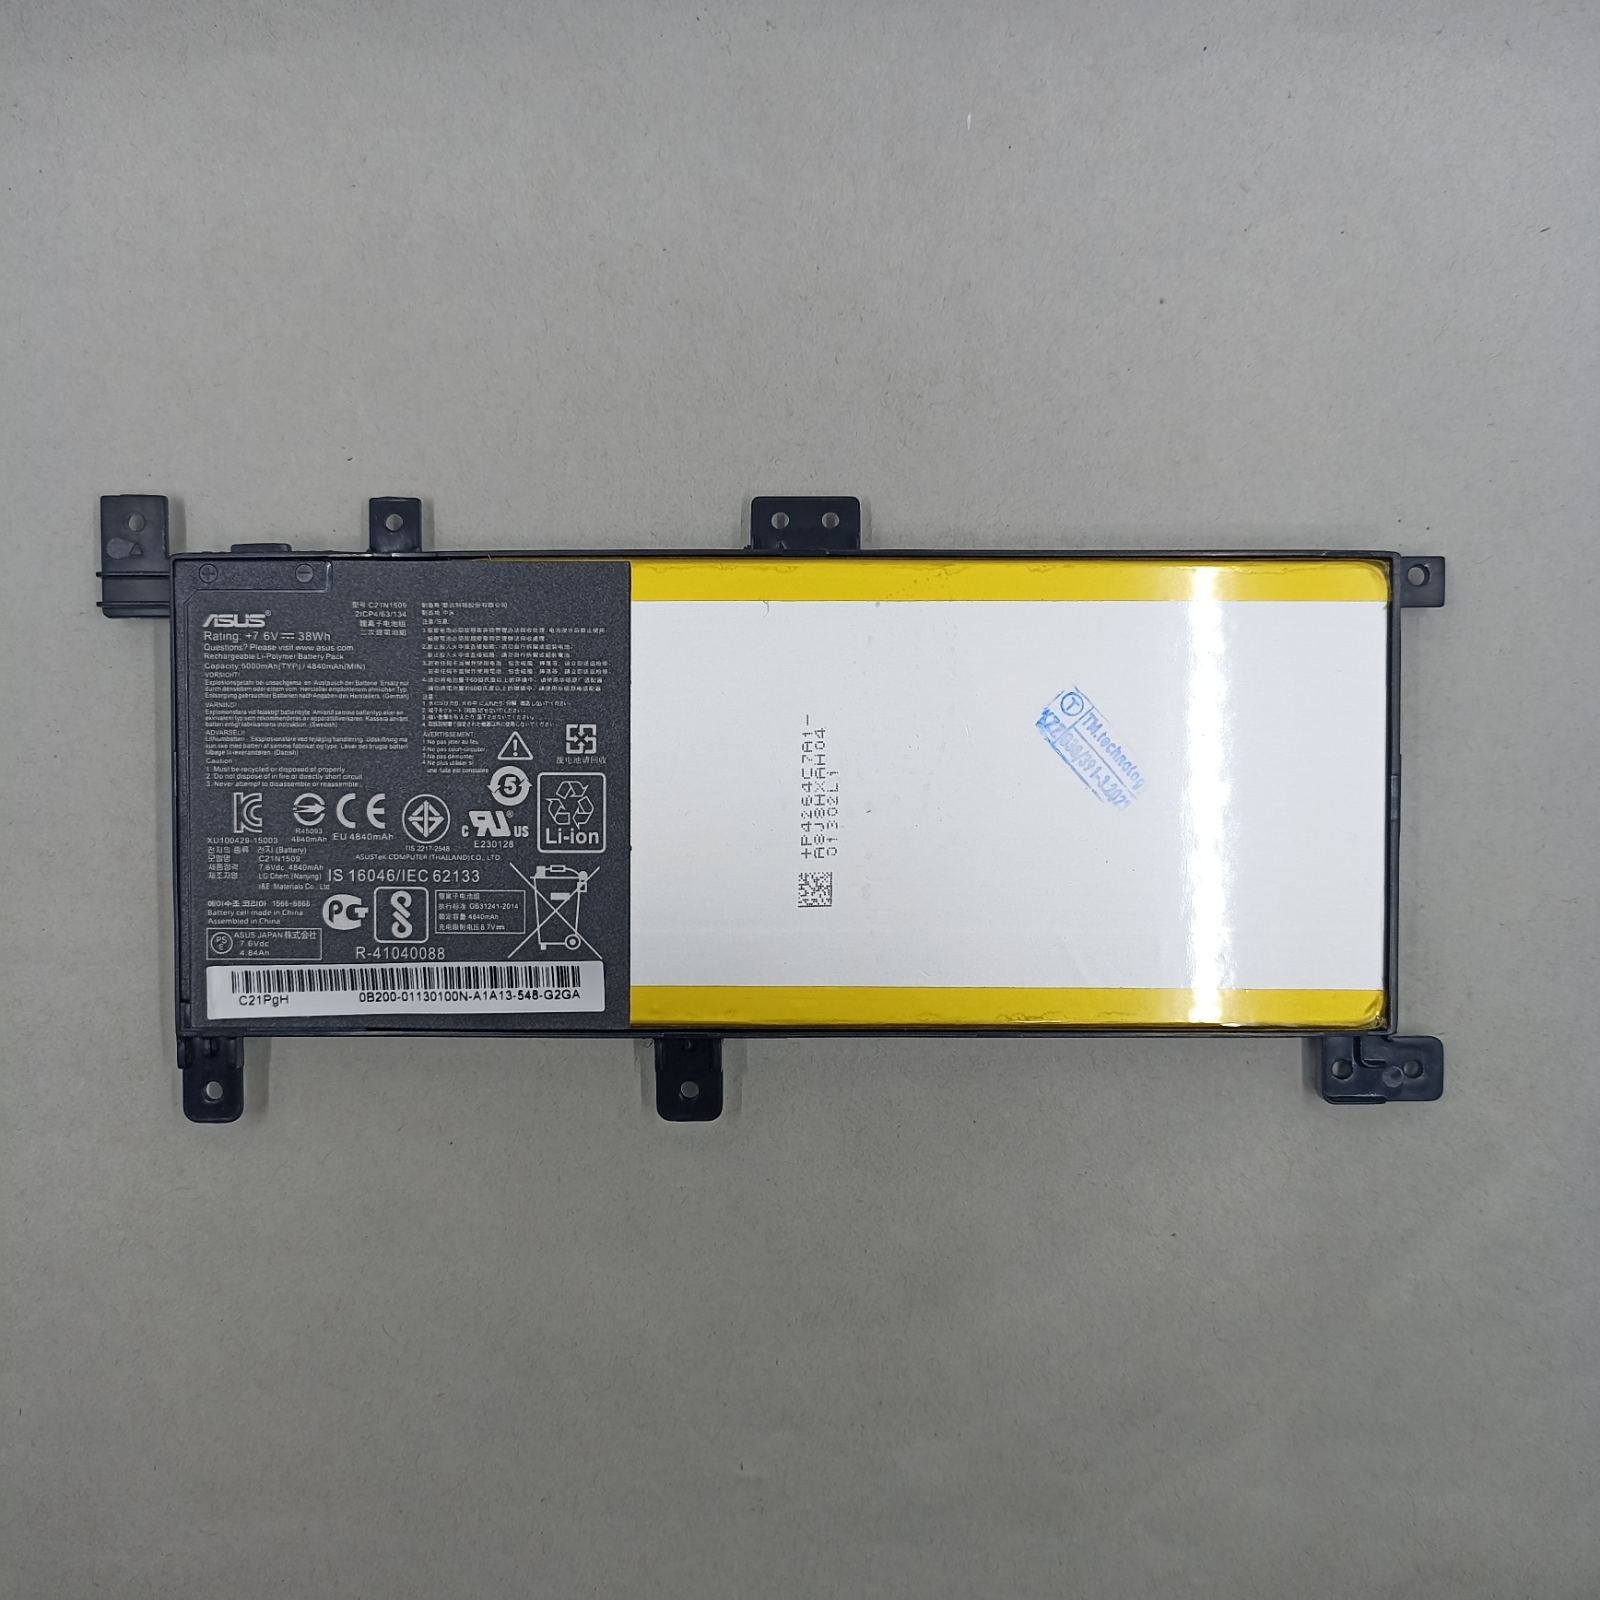 Replacement Battery for Asus X556UR A1